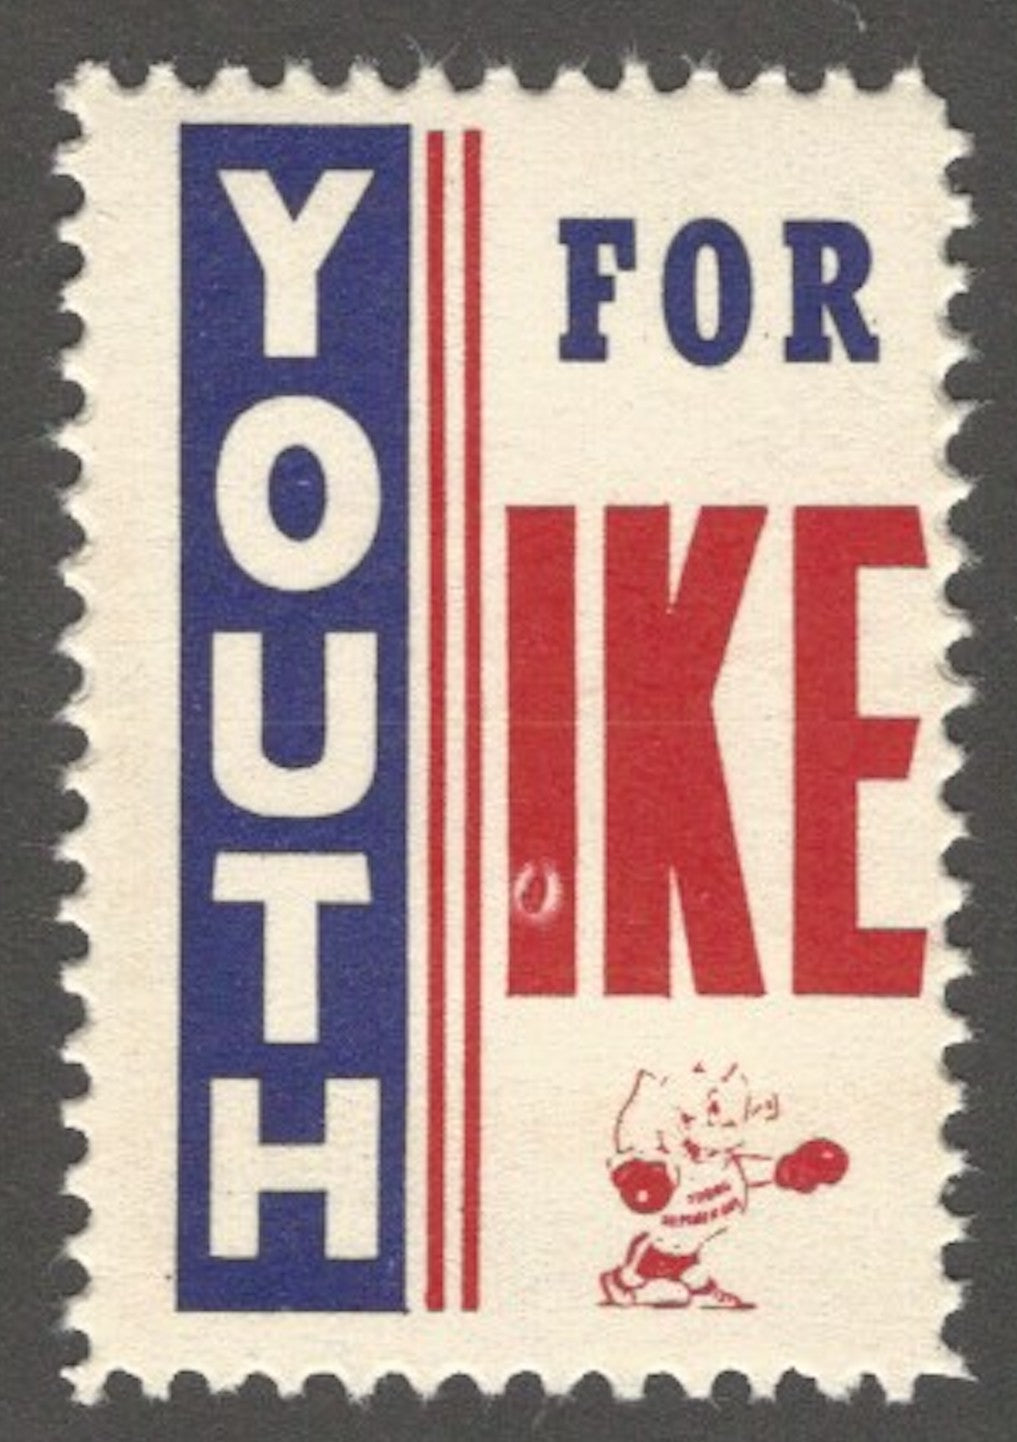 YOUTH FOR IKE, Dwight D. Eisenhower Presidential Election Campaign Poster Stamp